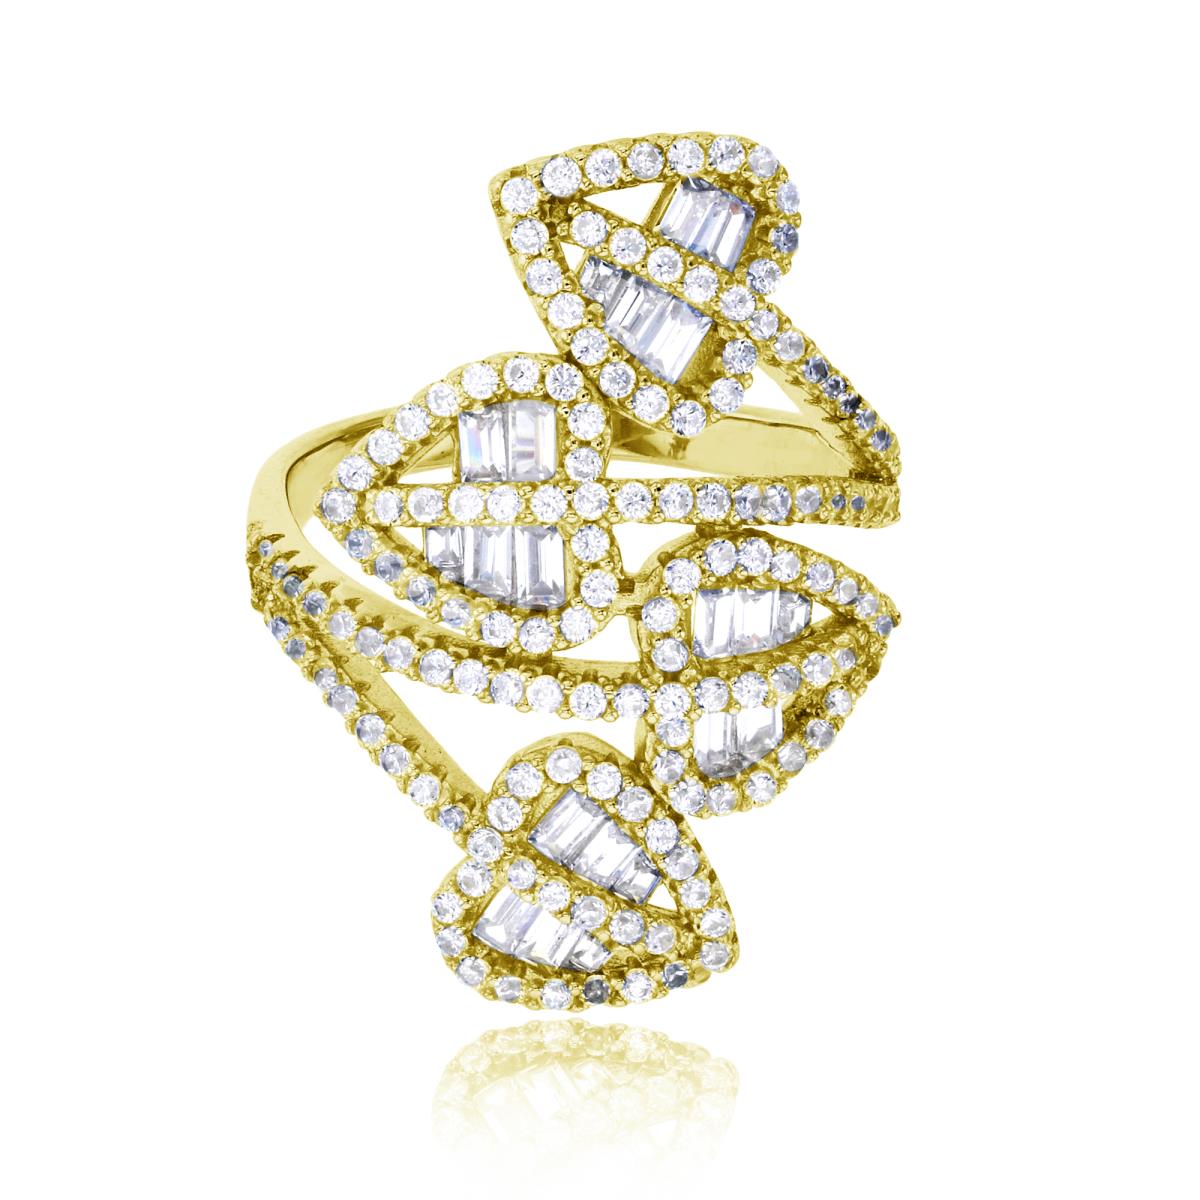 Sterling Silver Yellow Pave Rd & Baguette CZ 4-Row Leaves Cocktail Fashion Ring